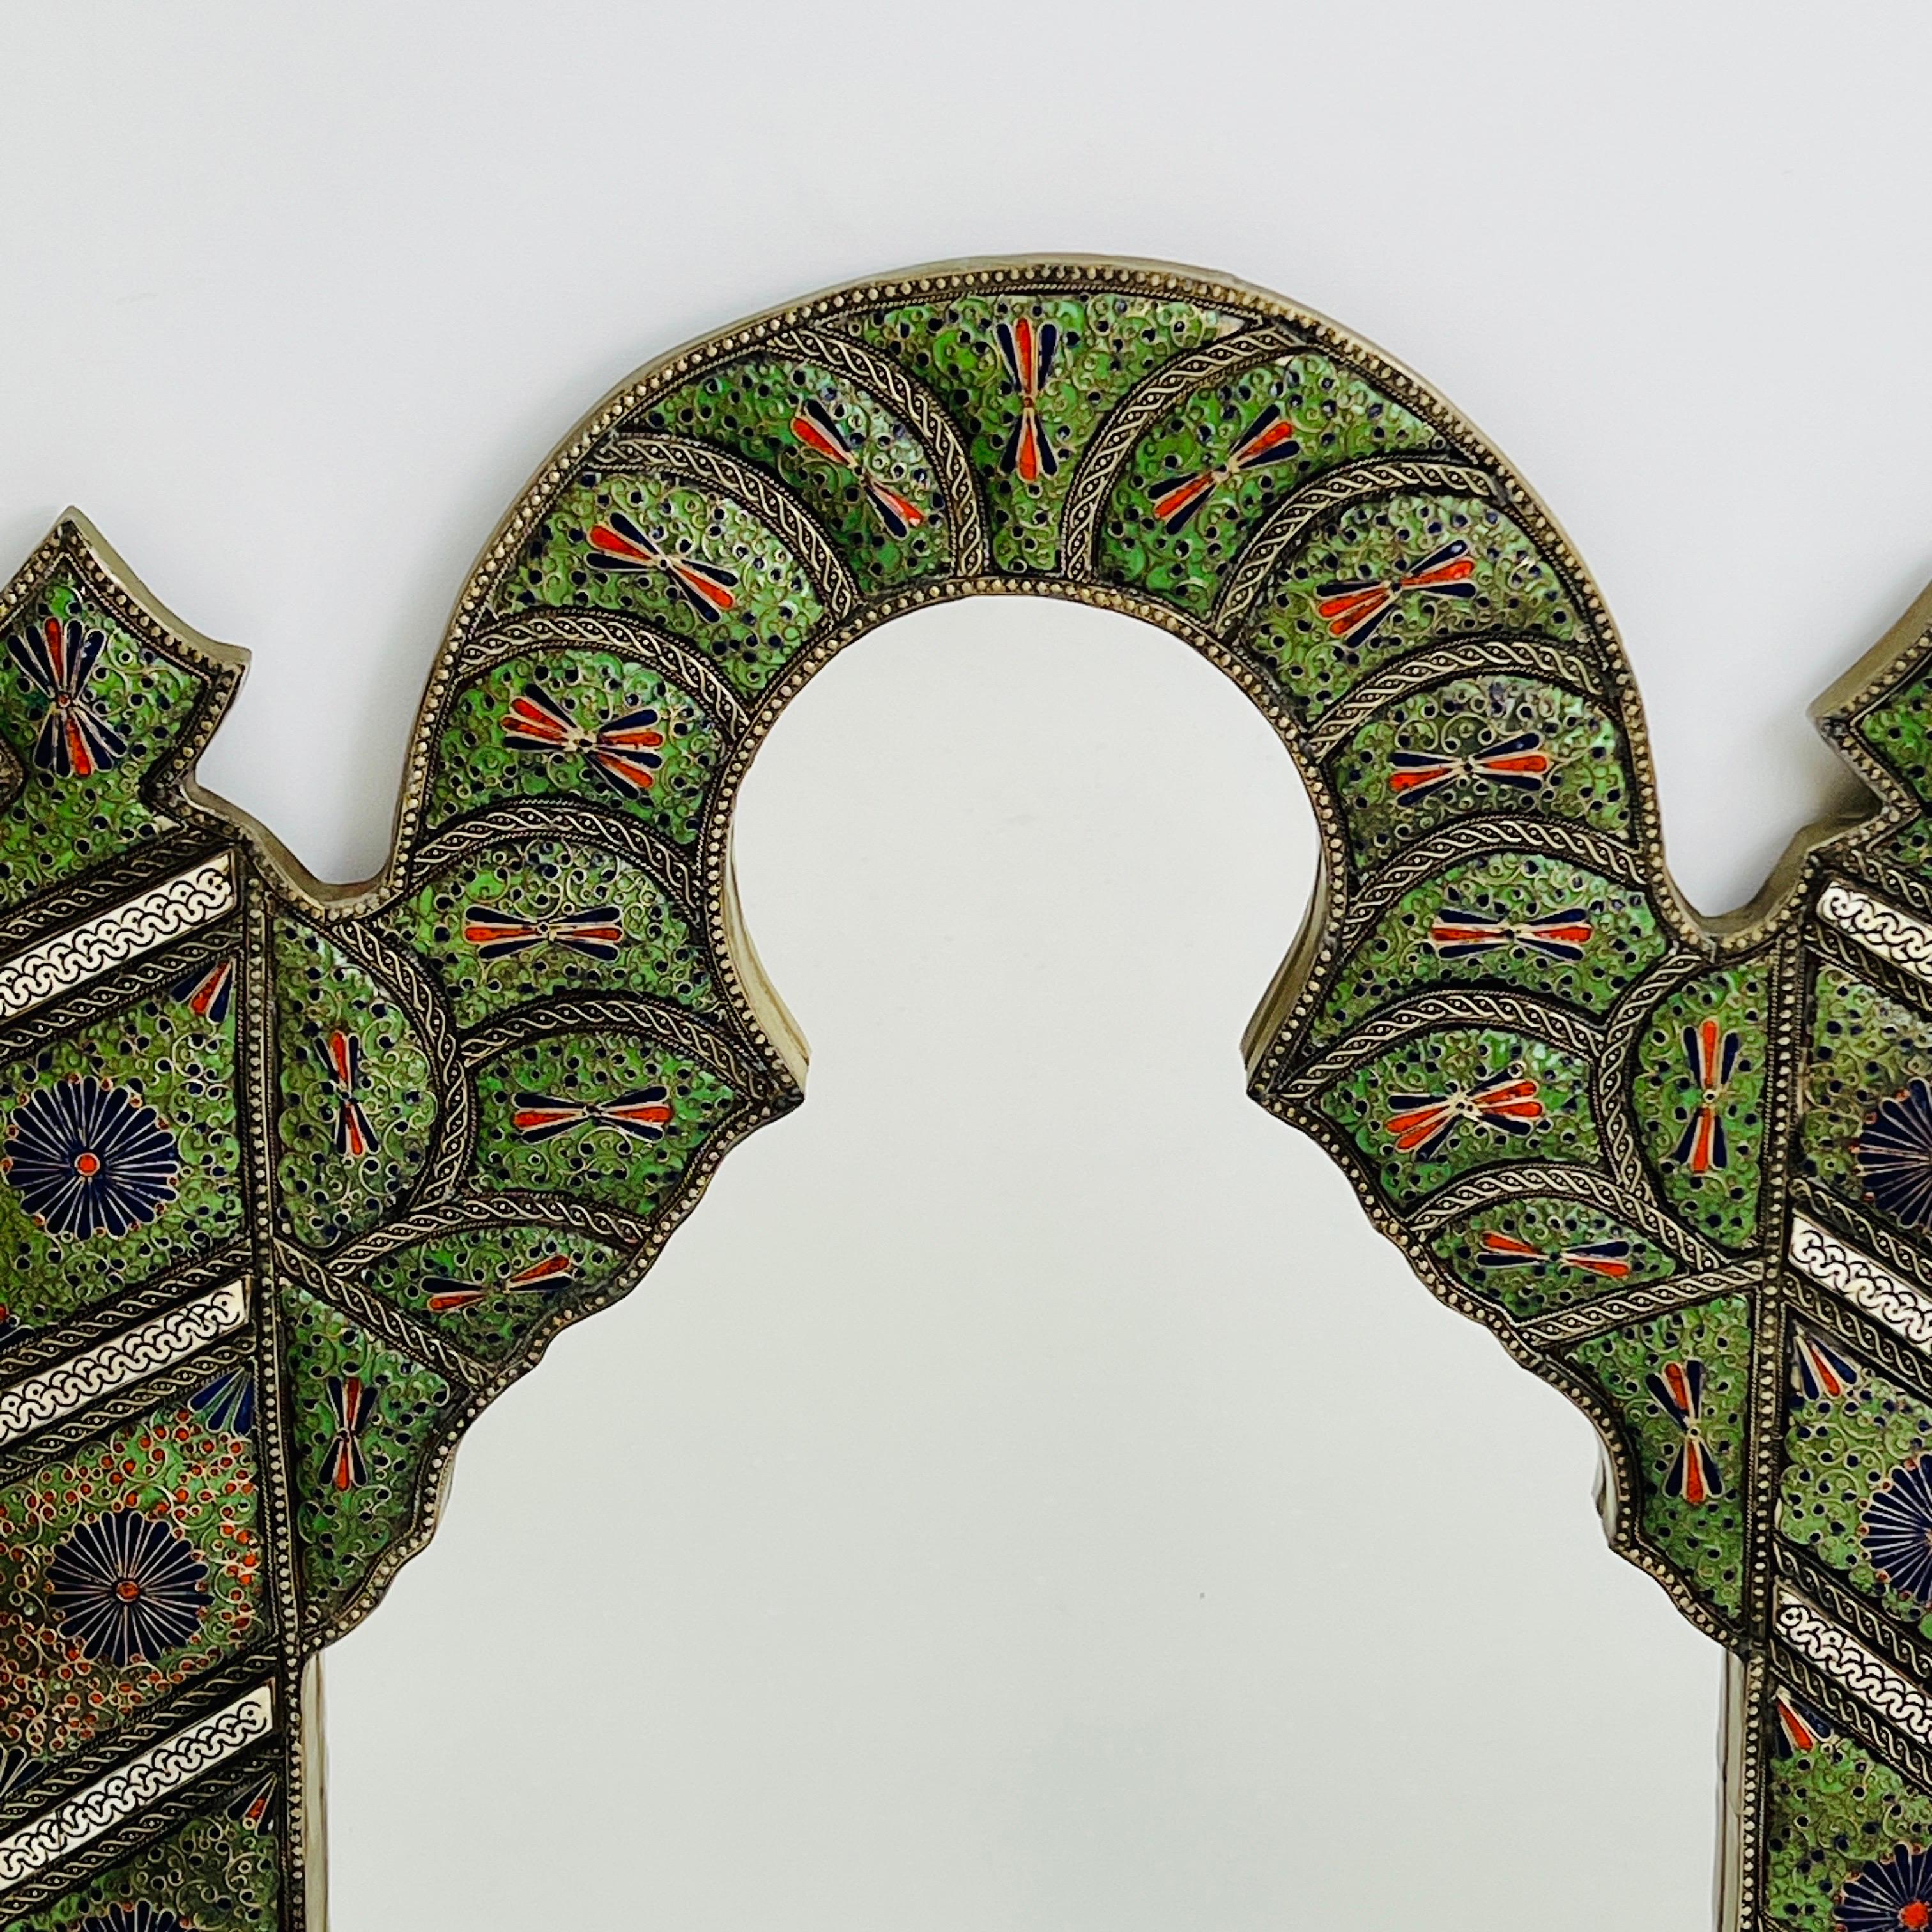 Moorish Arch Mirror in Enameled Cloisonné with Bone Inlays, Morocco c. 1950's For Sale 3